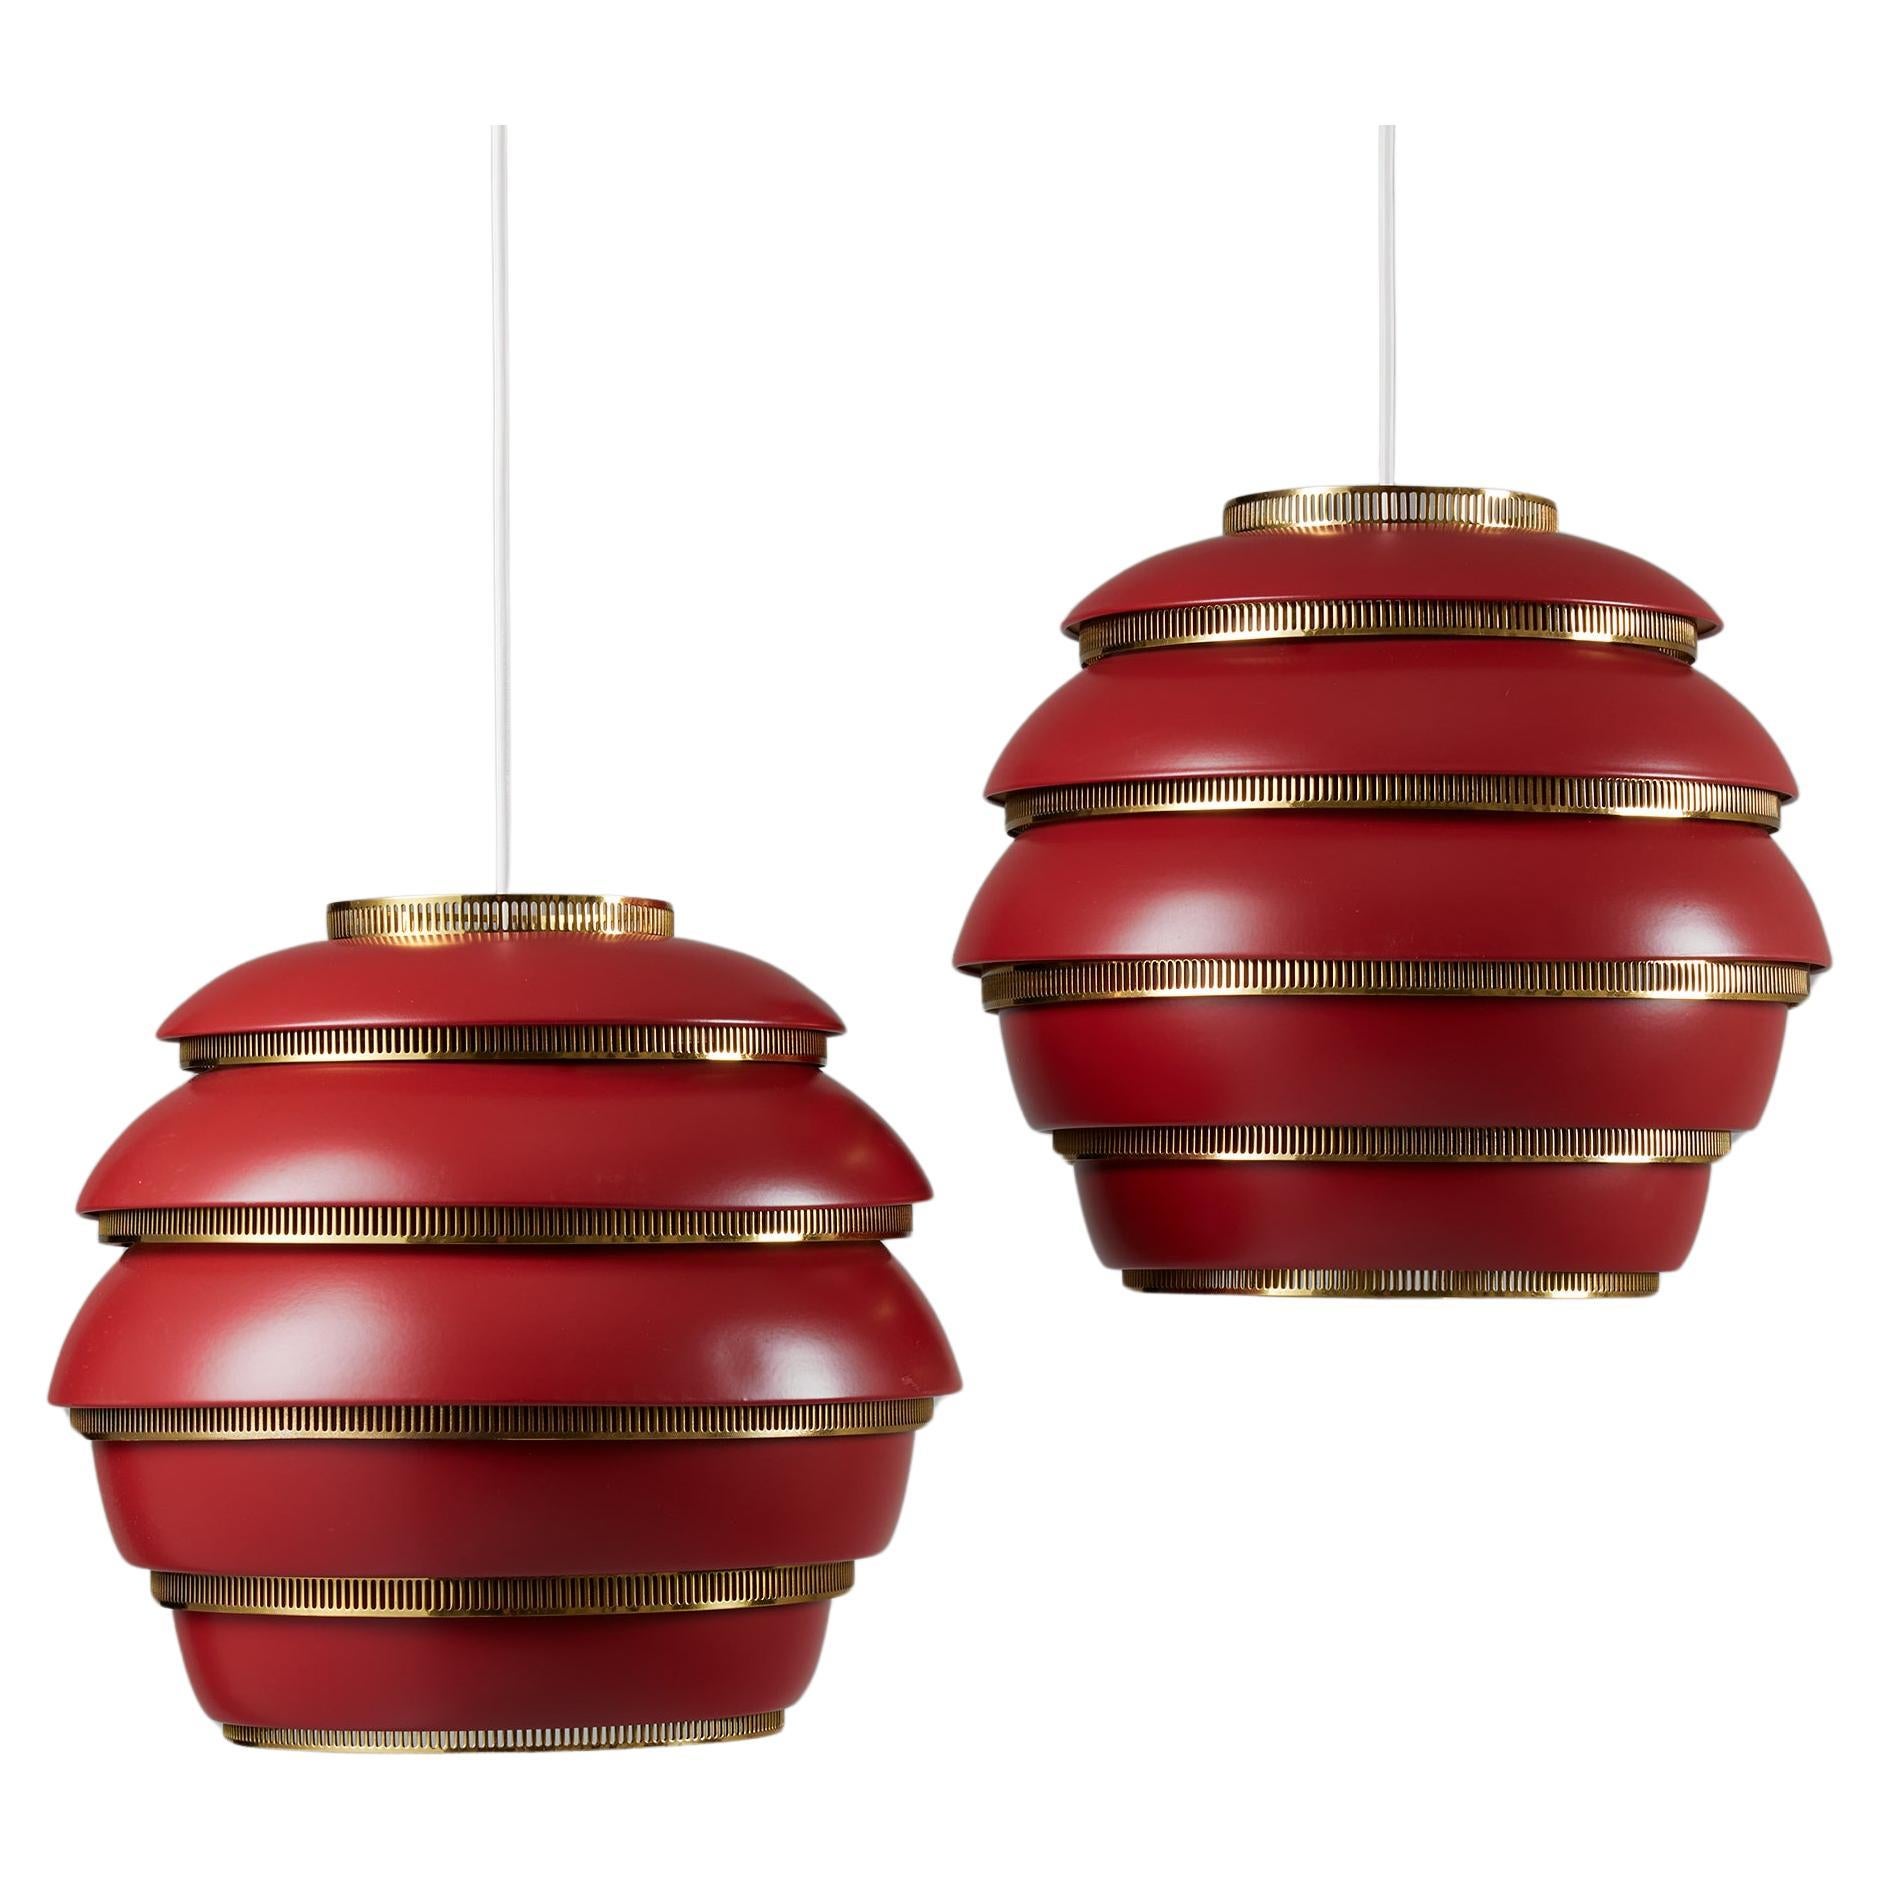 Pair of ceiling lamps 'Beehive' model A332 designed by Alvar Aalto, 1952, Red